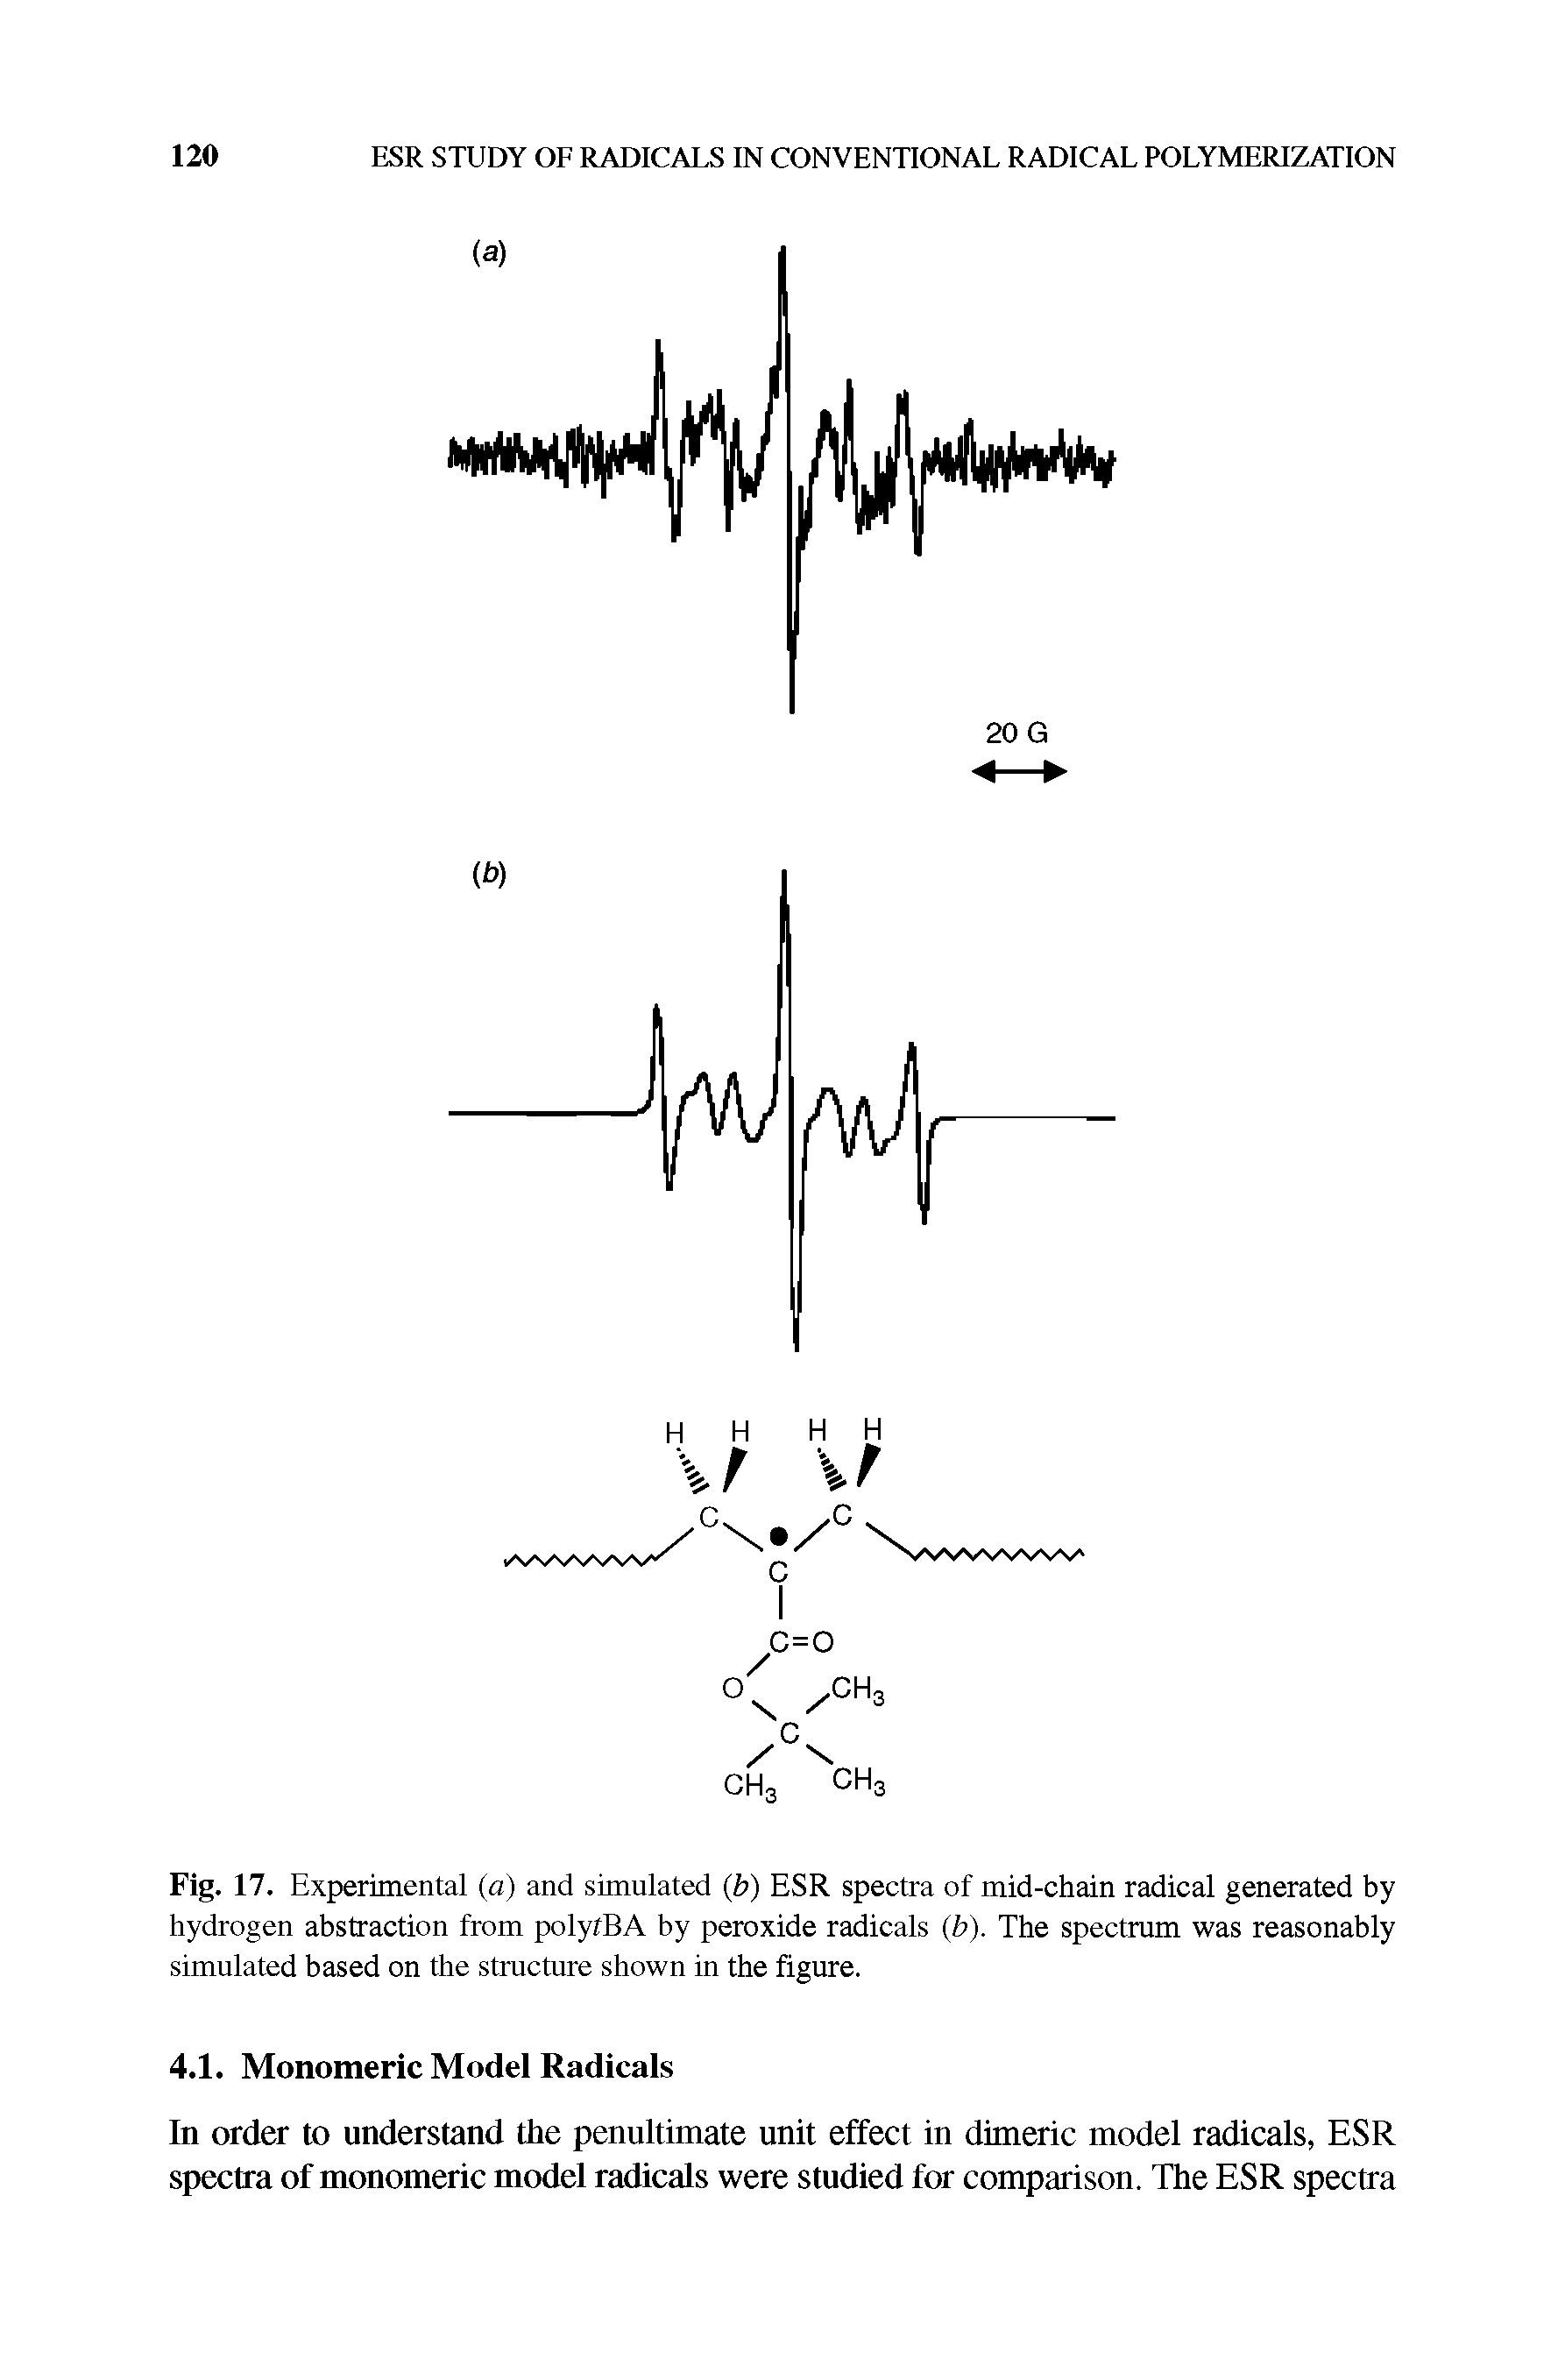 Fig. 17. Experimental (a) and simulated b) ESR spectra of mid-chain radical generated by hydrogen abstraction from polyfBA by peroxide radicals b). The spectrum was reasonably simulated based on the structure shown in the figure.